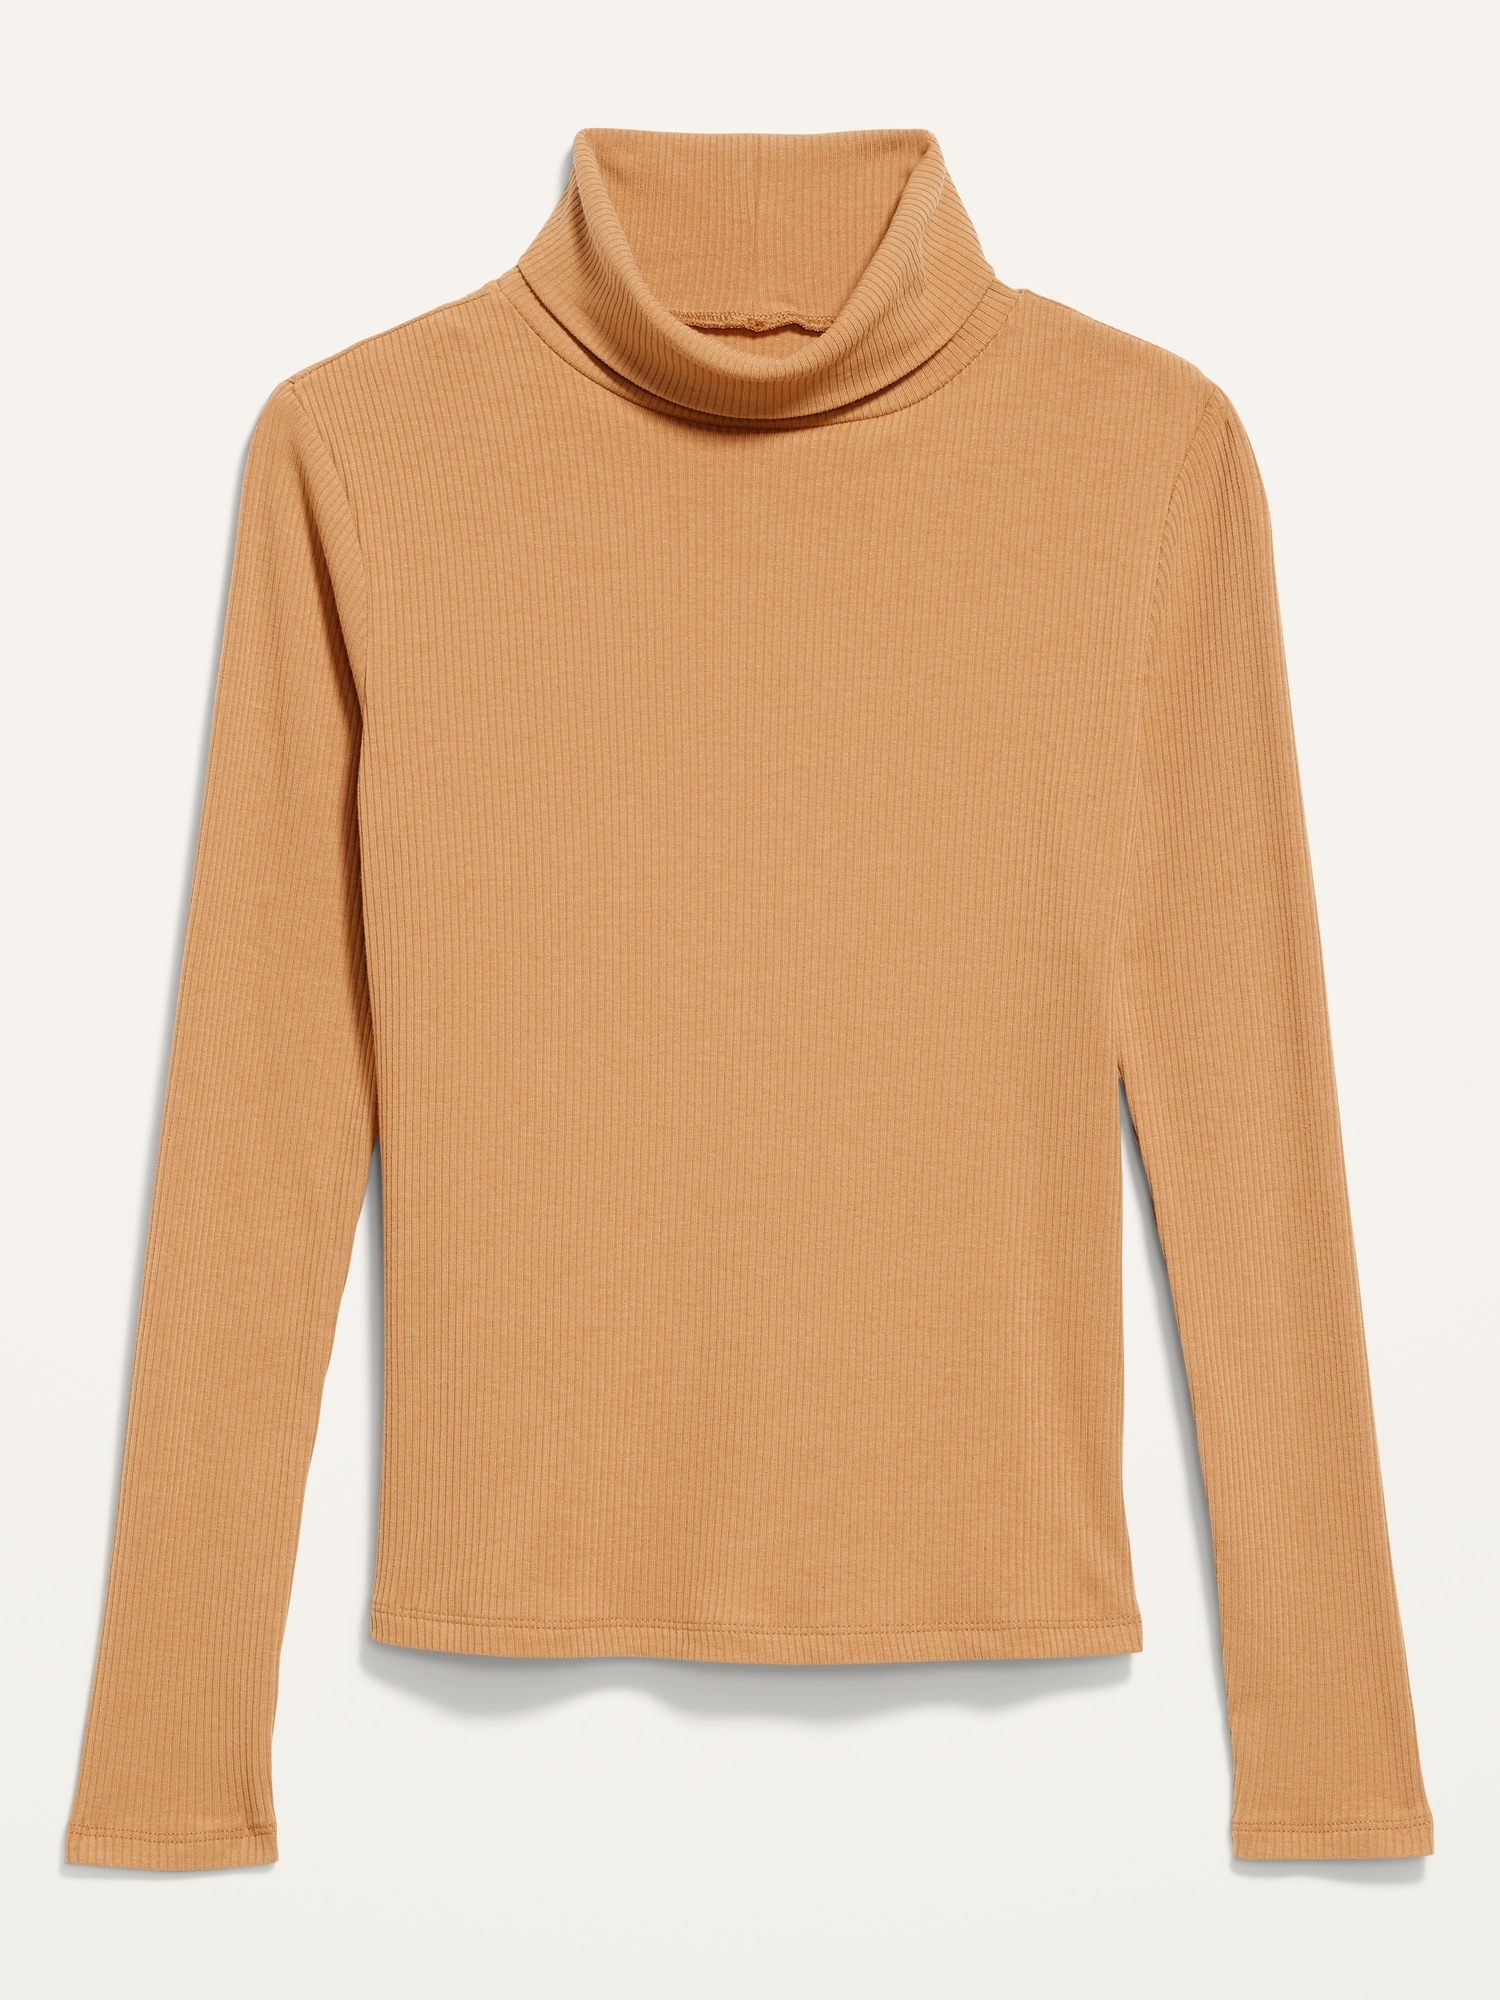 Rib-Knit Turtleneck Top for Women | Old Navy